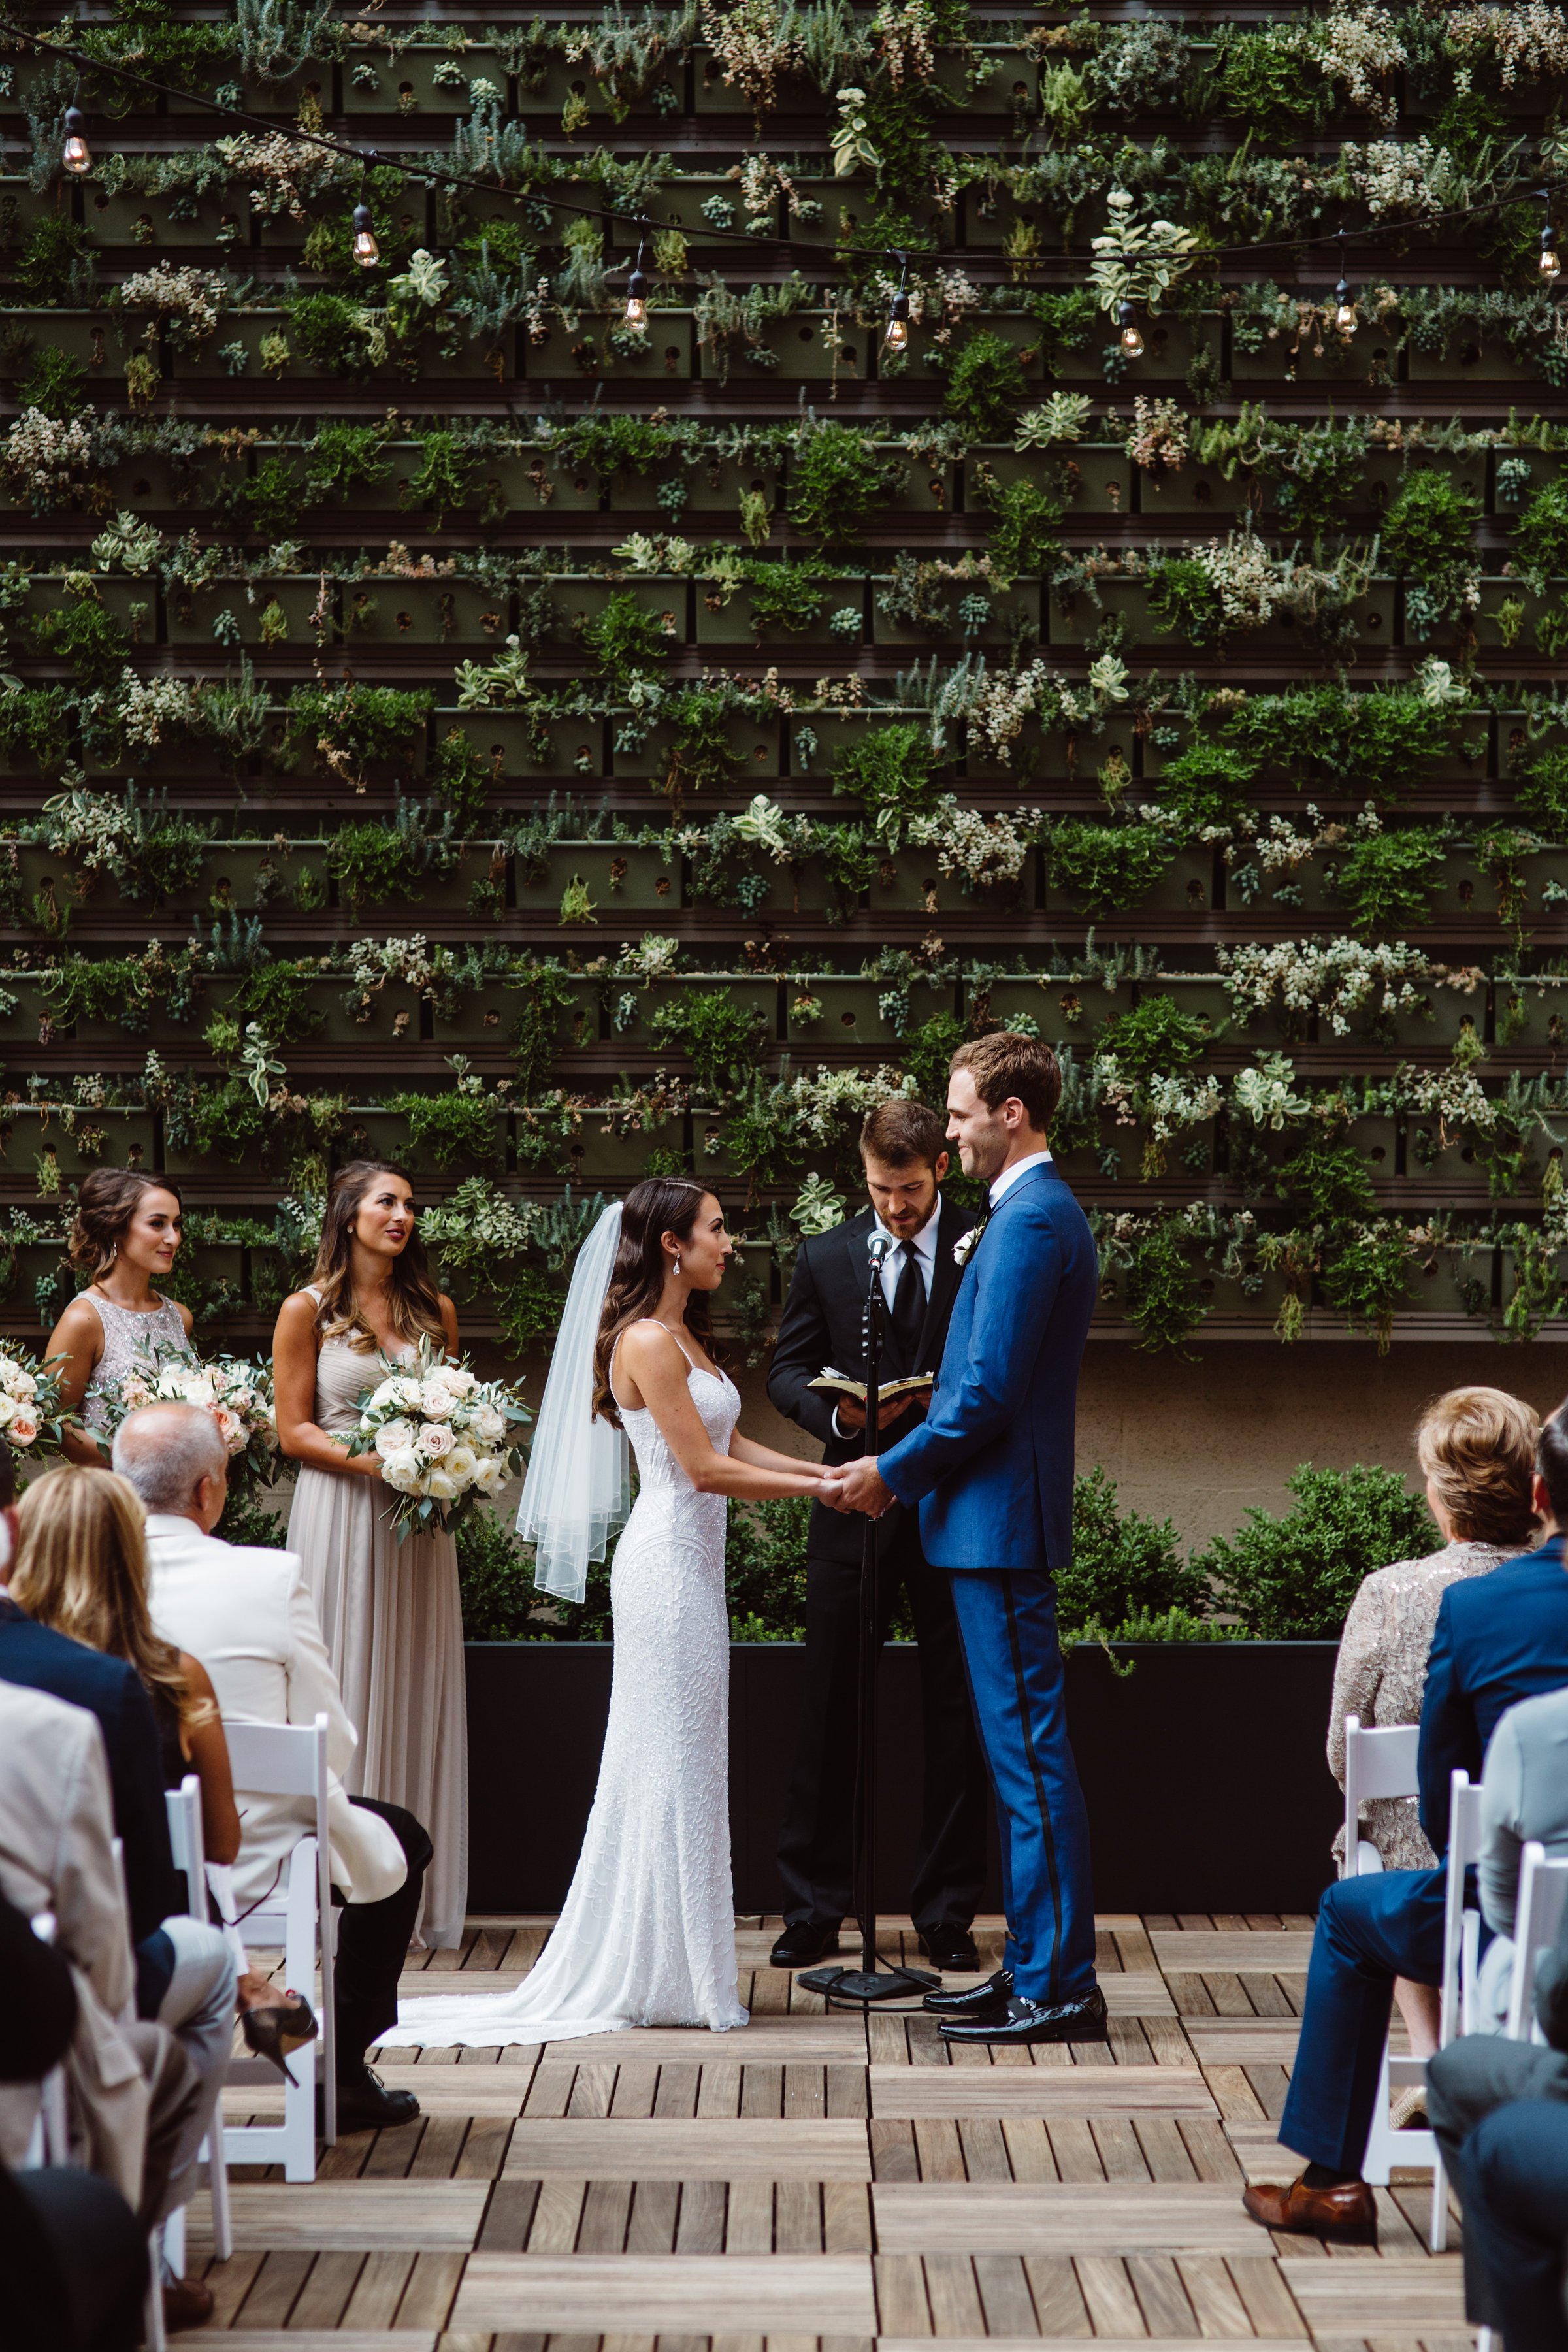 Ceremony on outdoor Terrace in front of greenery succulent wall